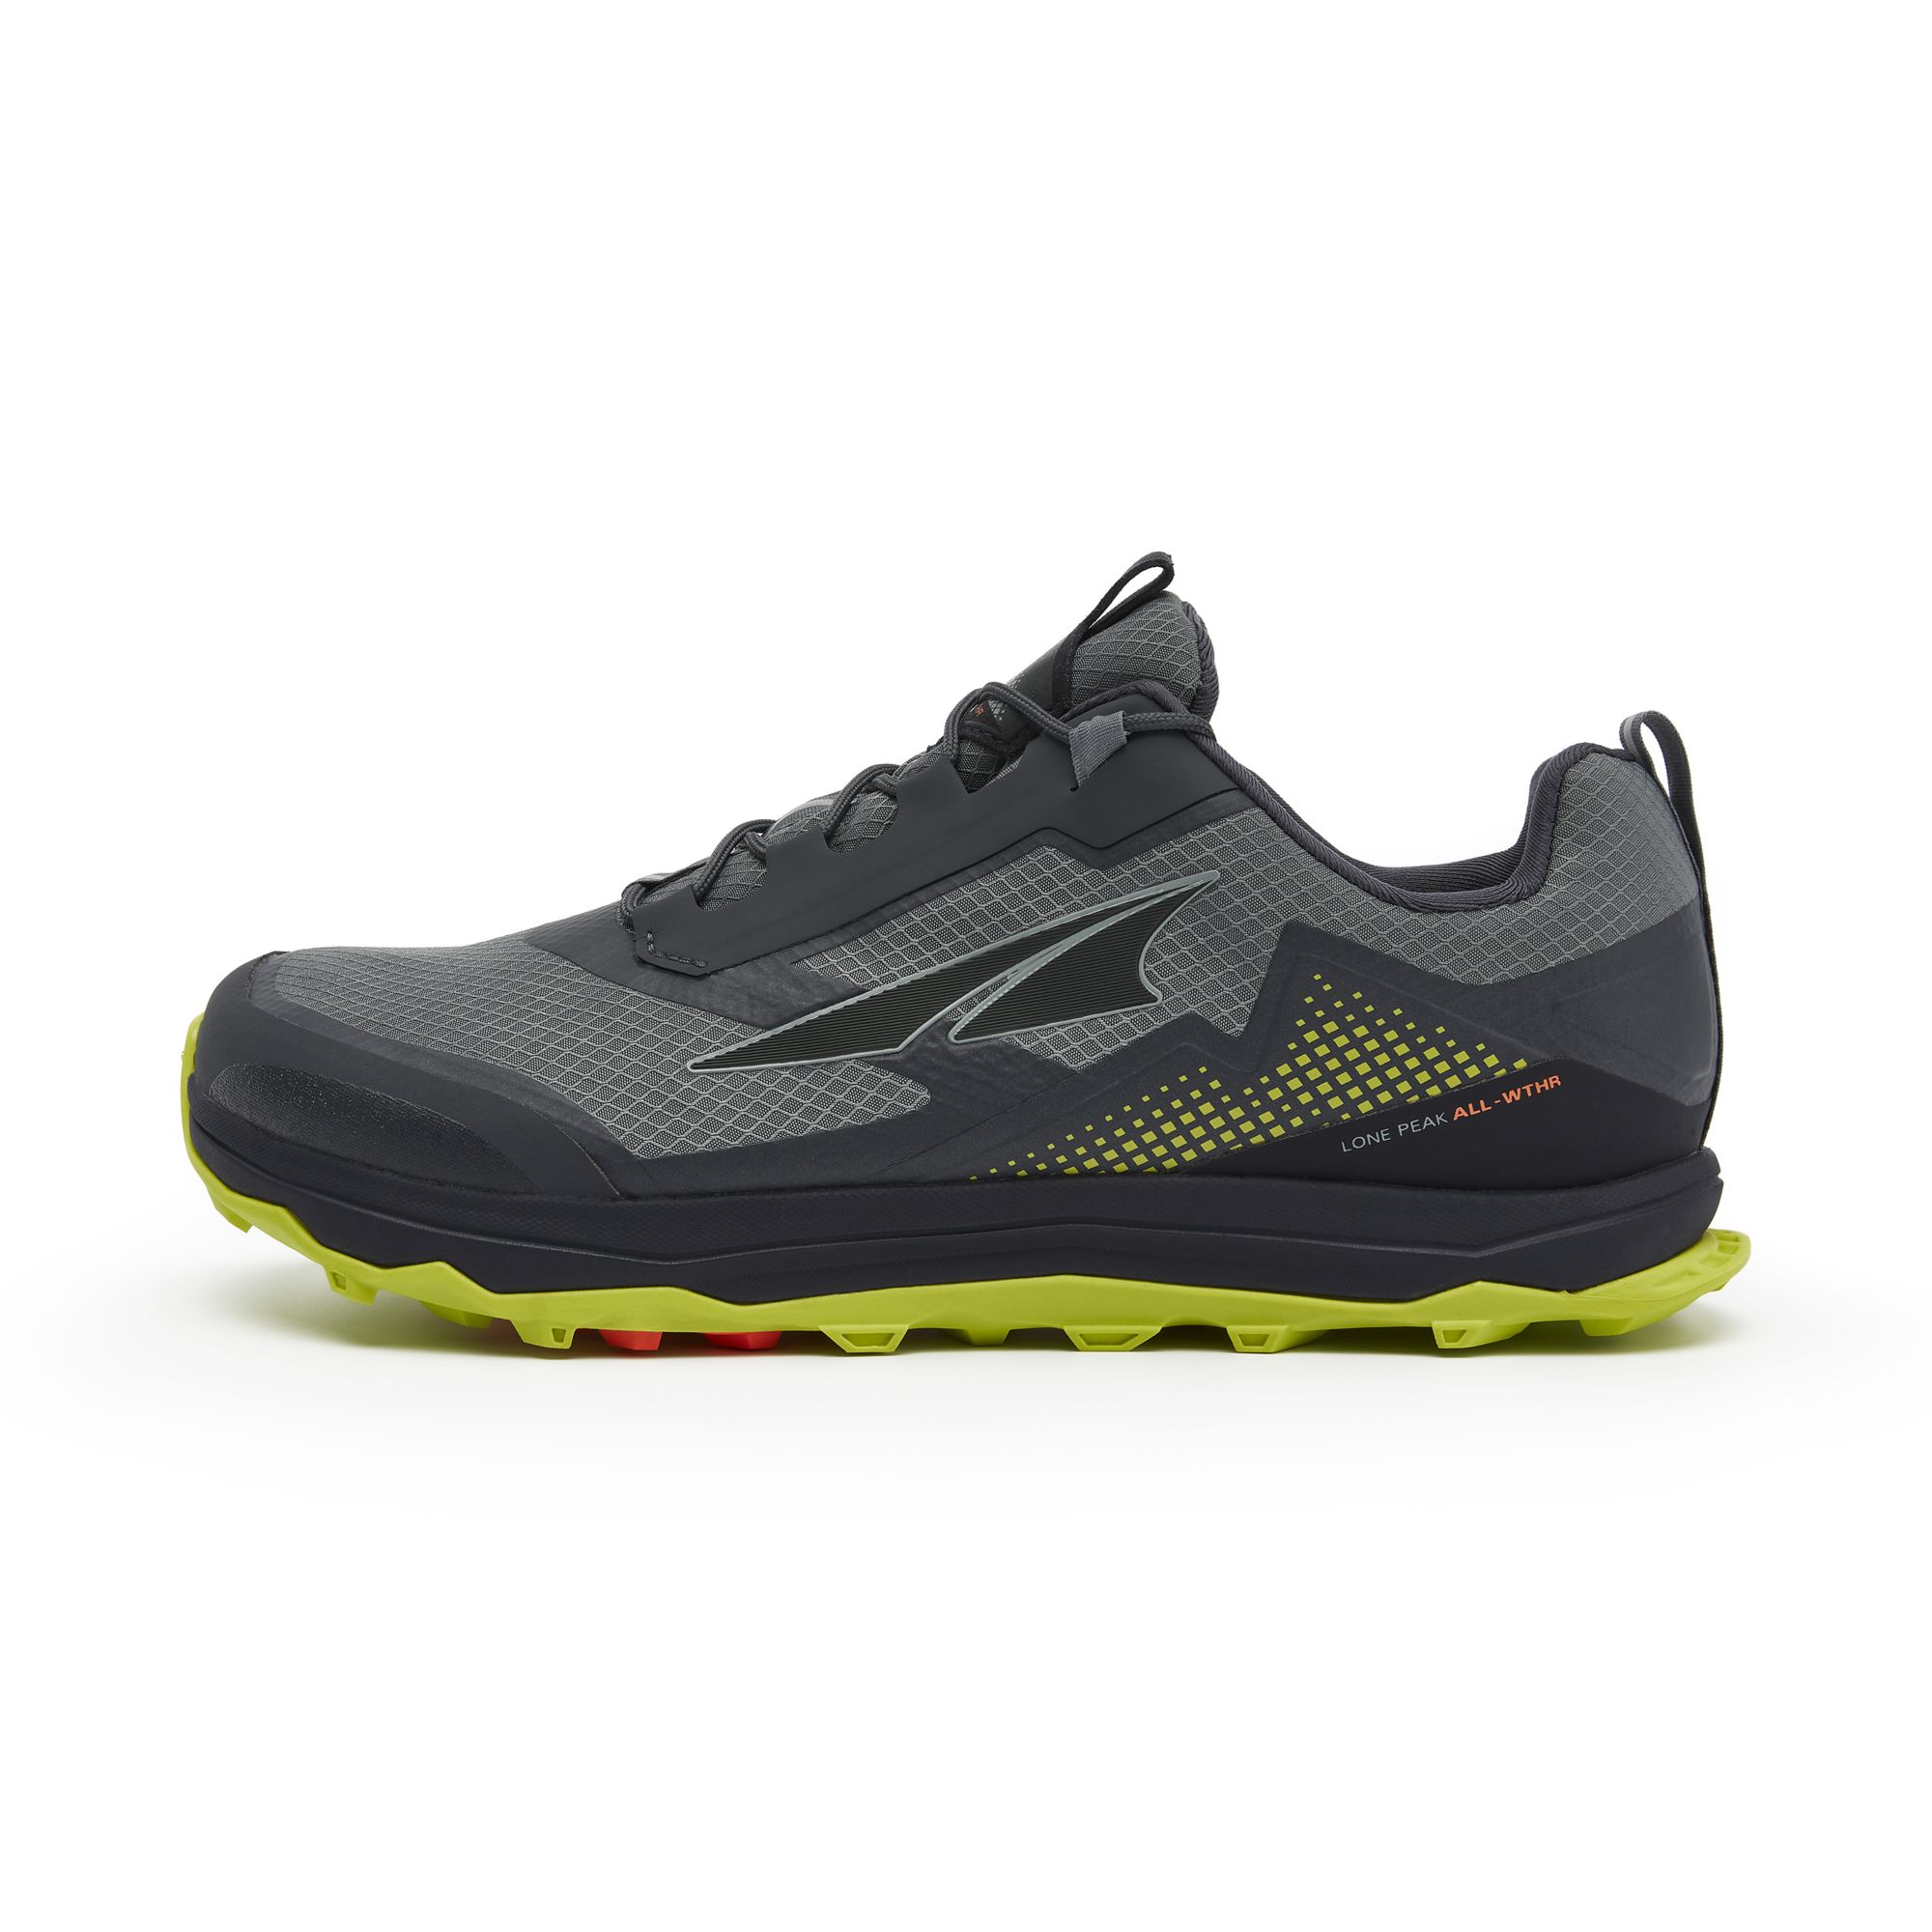 Men's Lone Peak ALL-WTHR Low: Trail Running Shoes | Altra Running